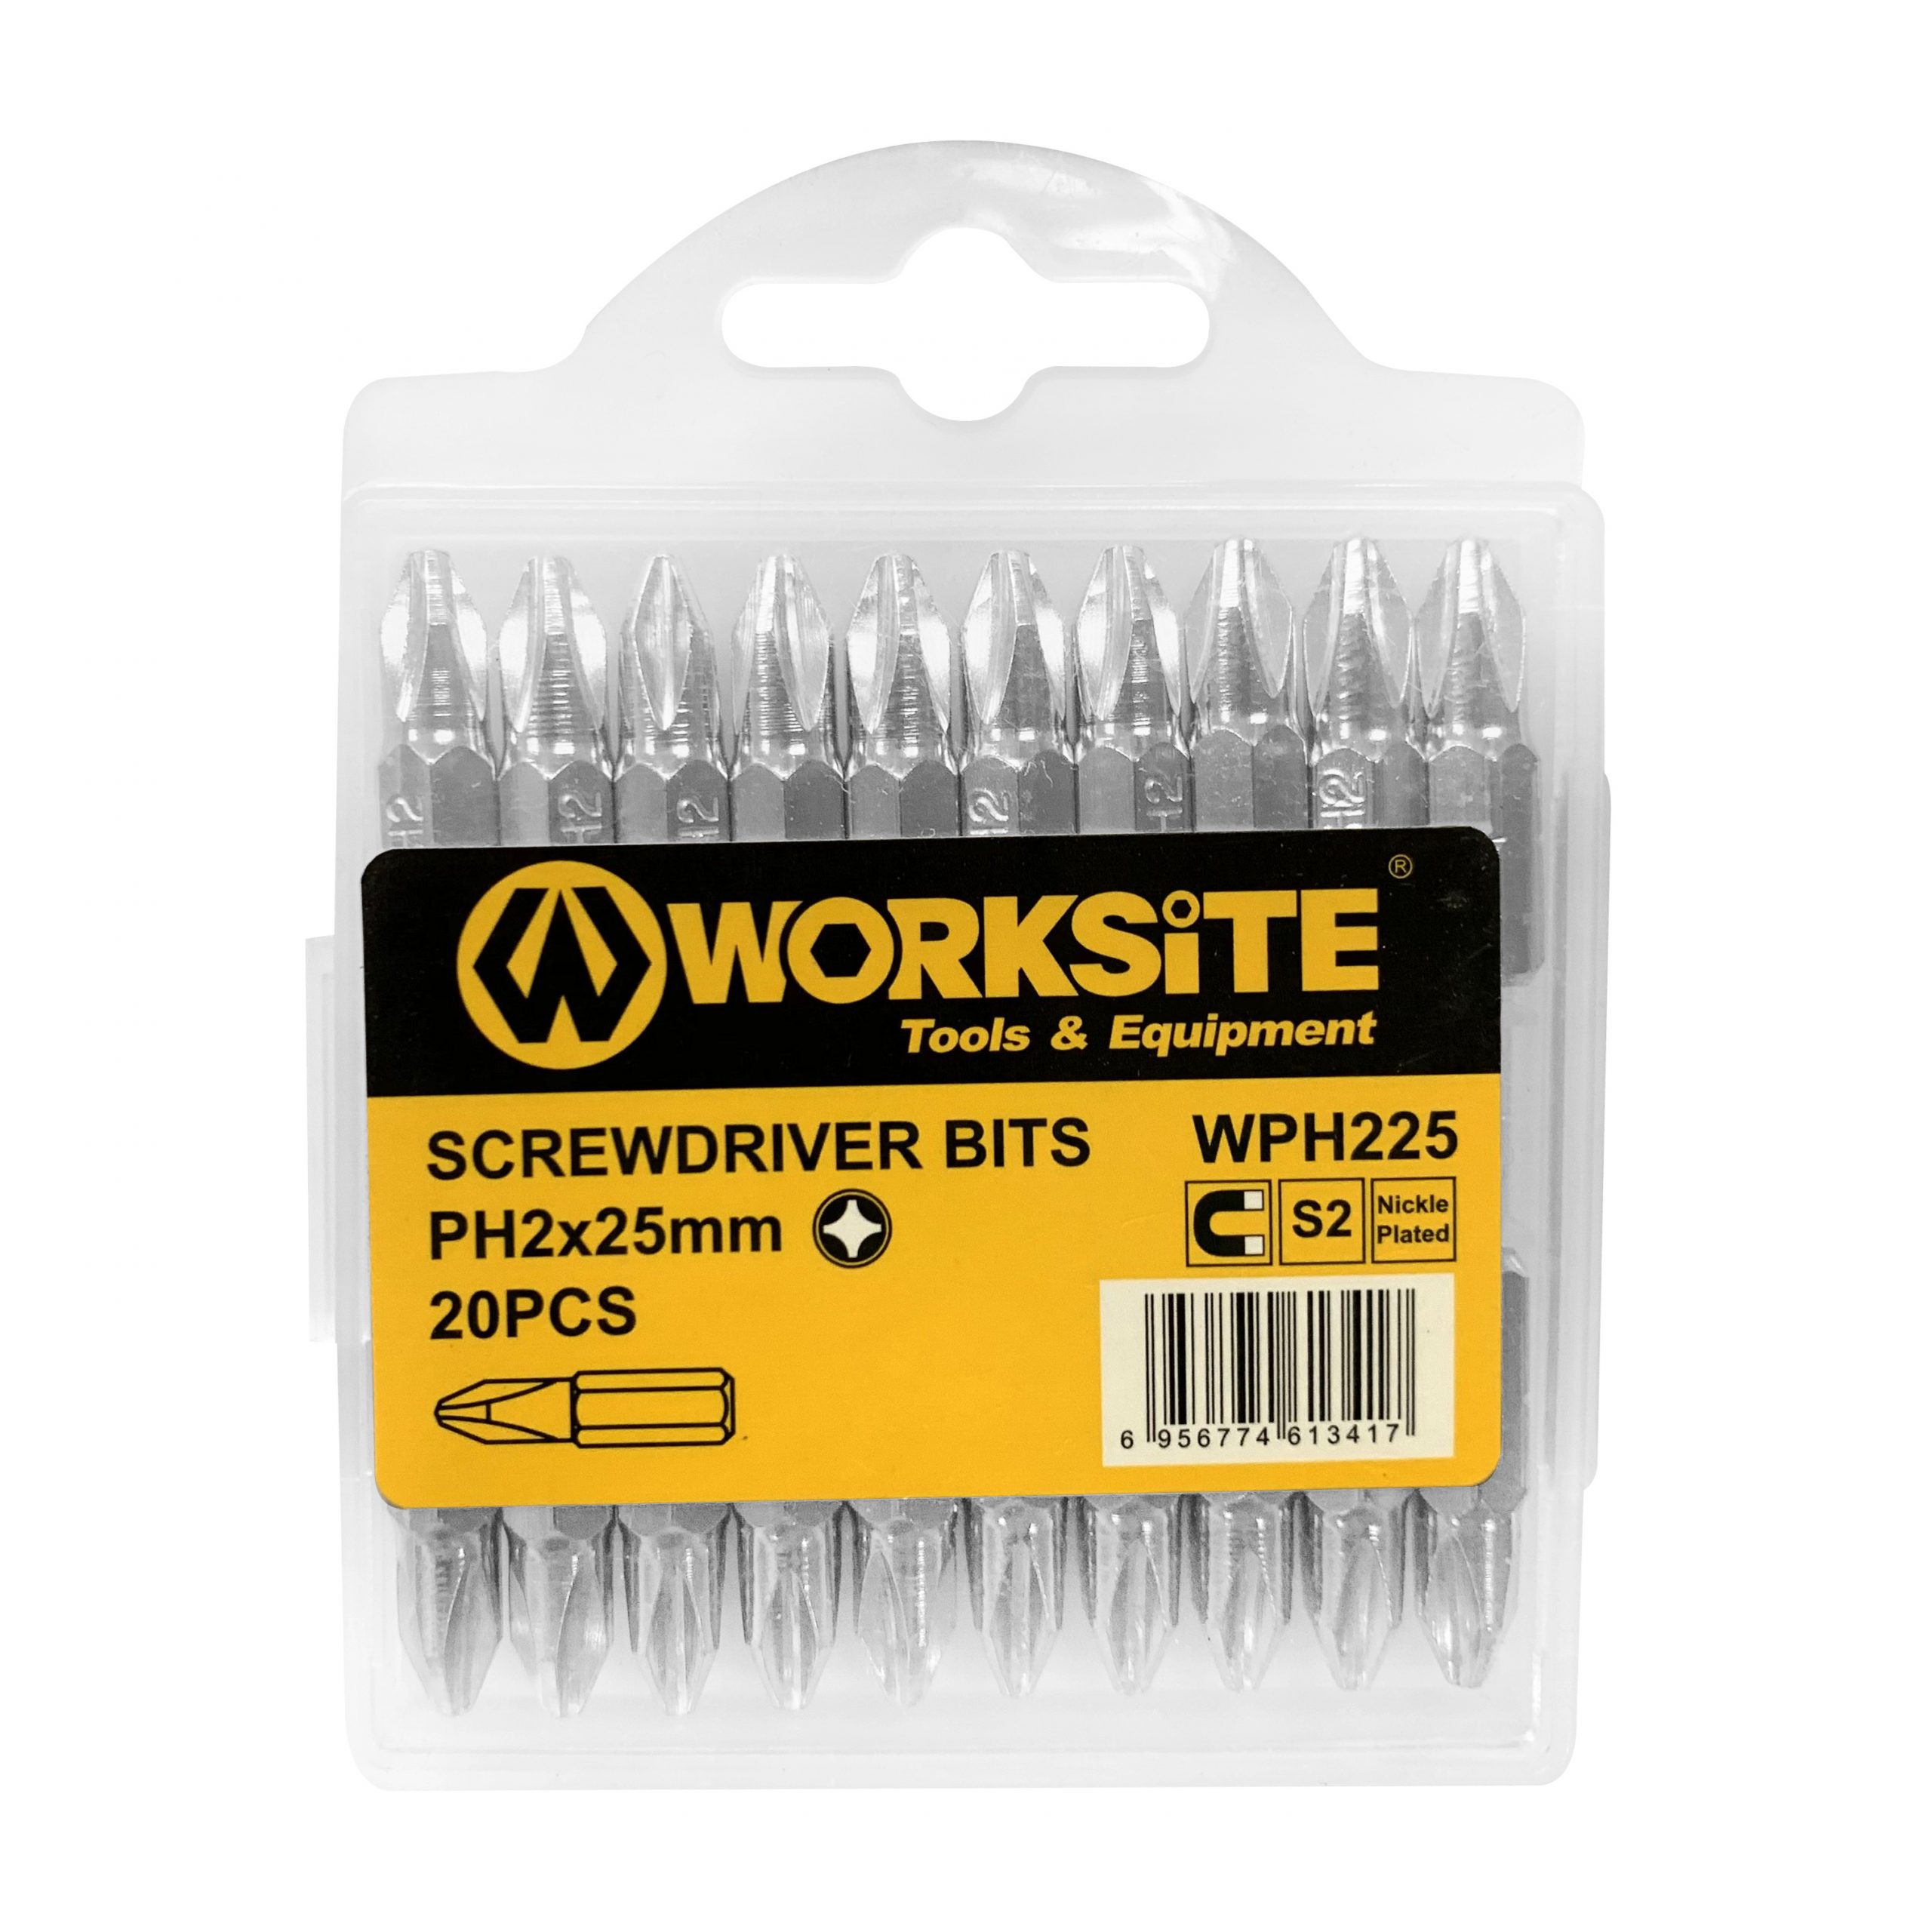 WORKSITE 20Pcs Screwdriver Bit Set.  Screwdriver Bit PH2 Screwdriver Bit Set With Tough Case. Bits Are Impacted Ready. Suitable For Both Hand Tools And Electric Tools. WPH255